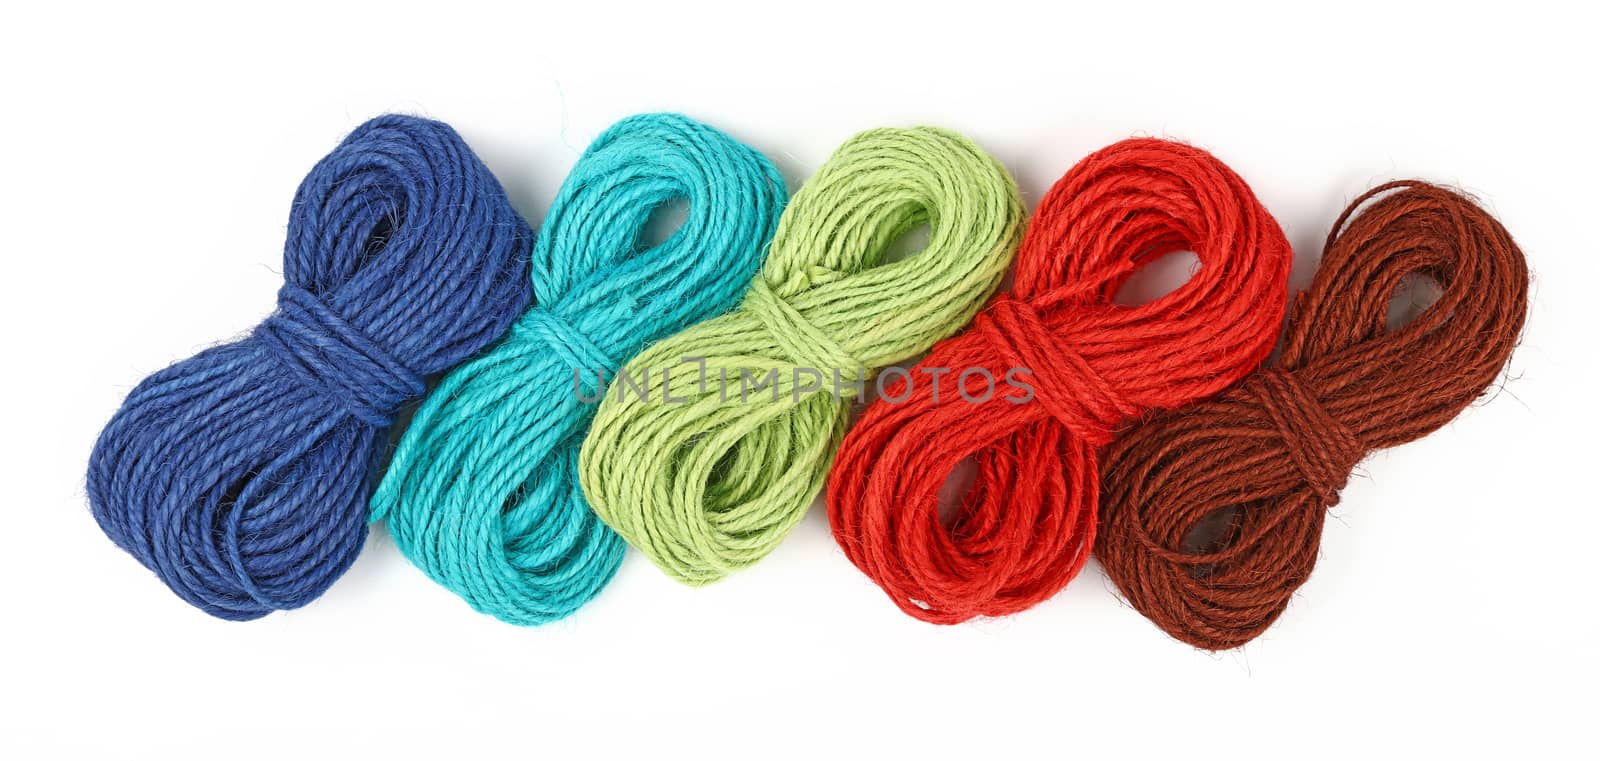 Group of five small coil skeins of natural colorful multicolor jute twine rope, selection of green, blue red, brown and teal, isolated on white background, close up, elevated top view, high angle